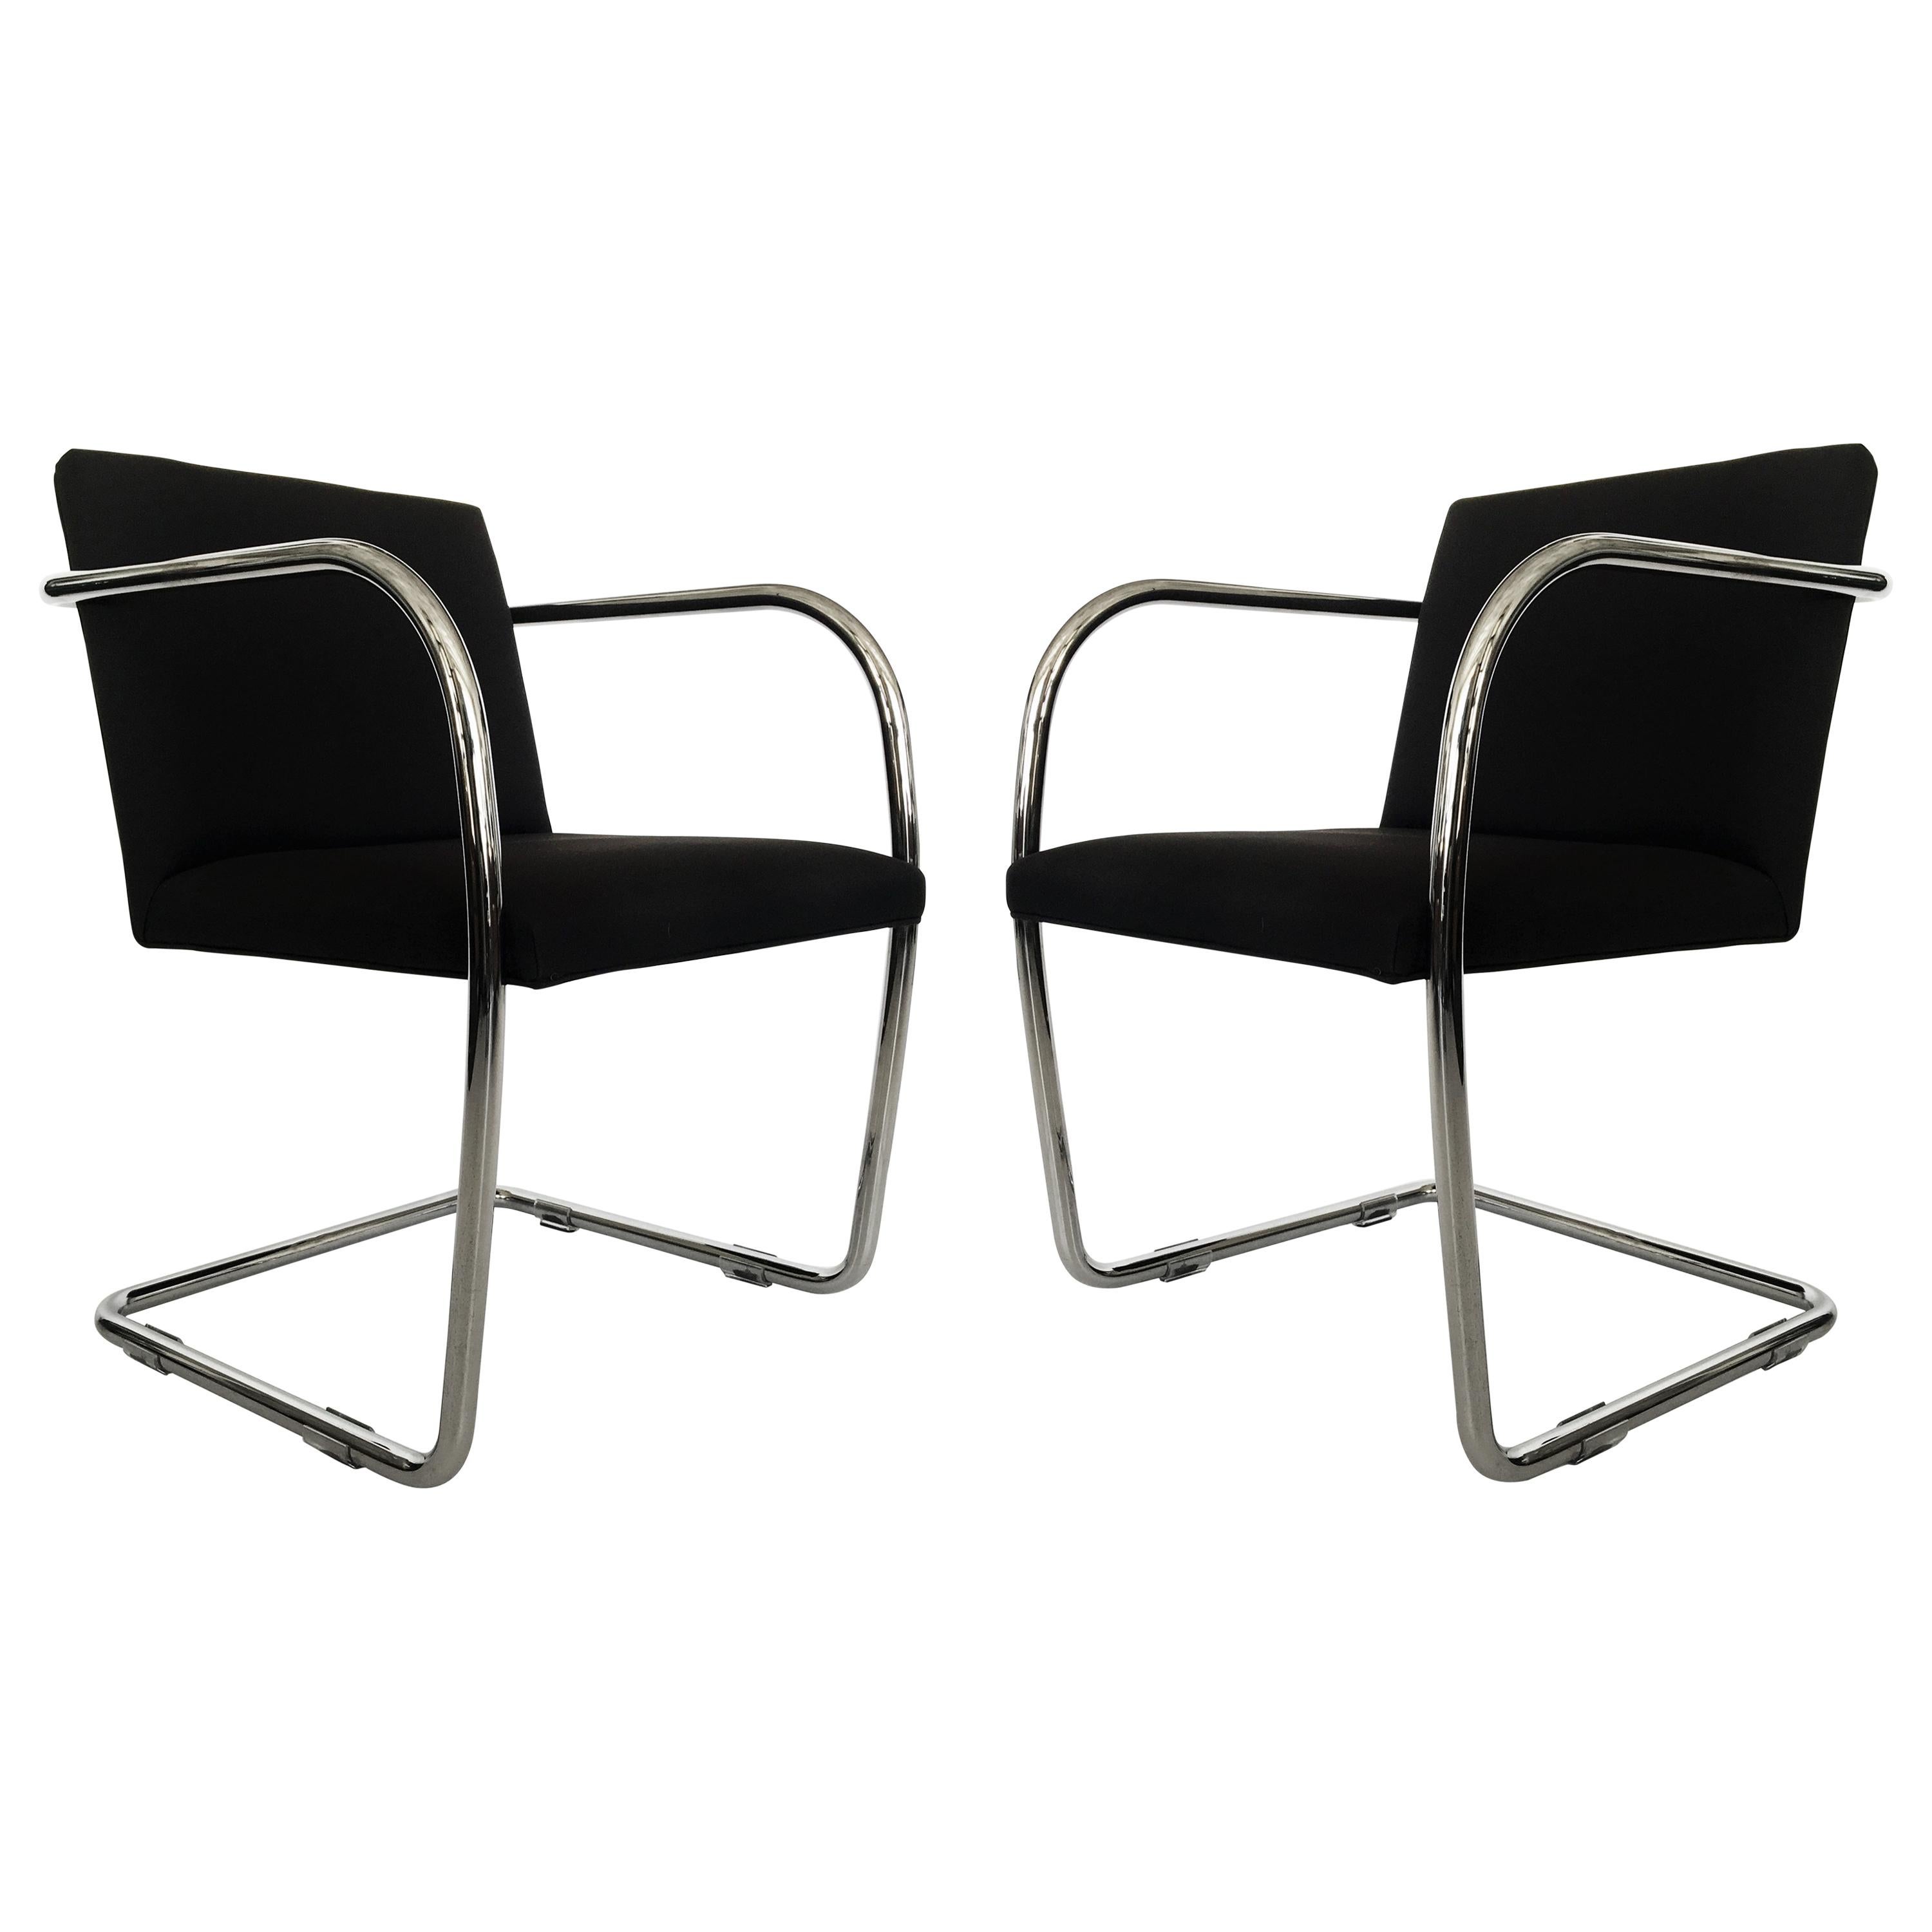 Pair Black and Chrome Brno Chairs by Mies van der Rohe for Thonet